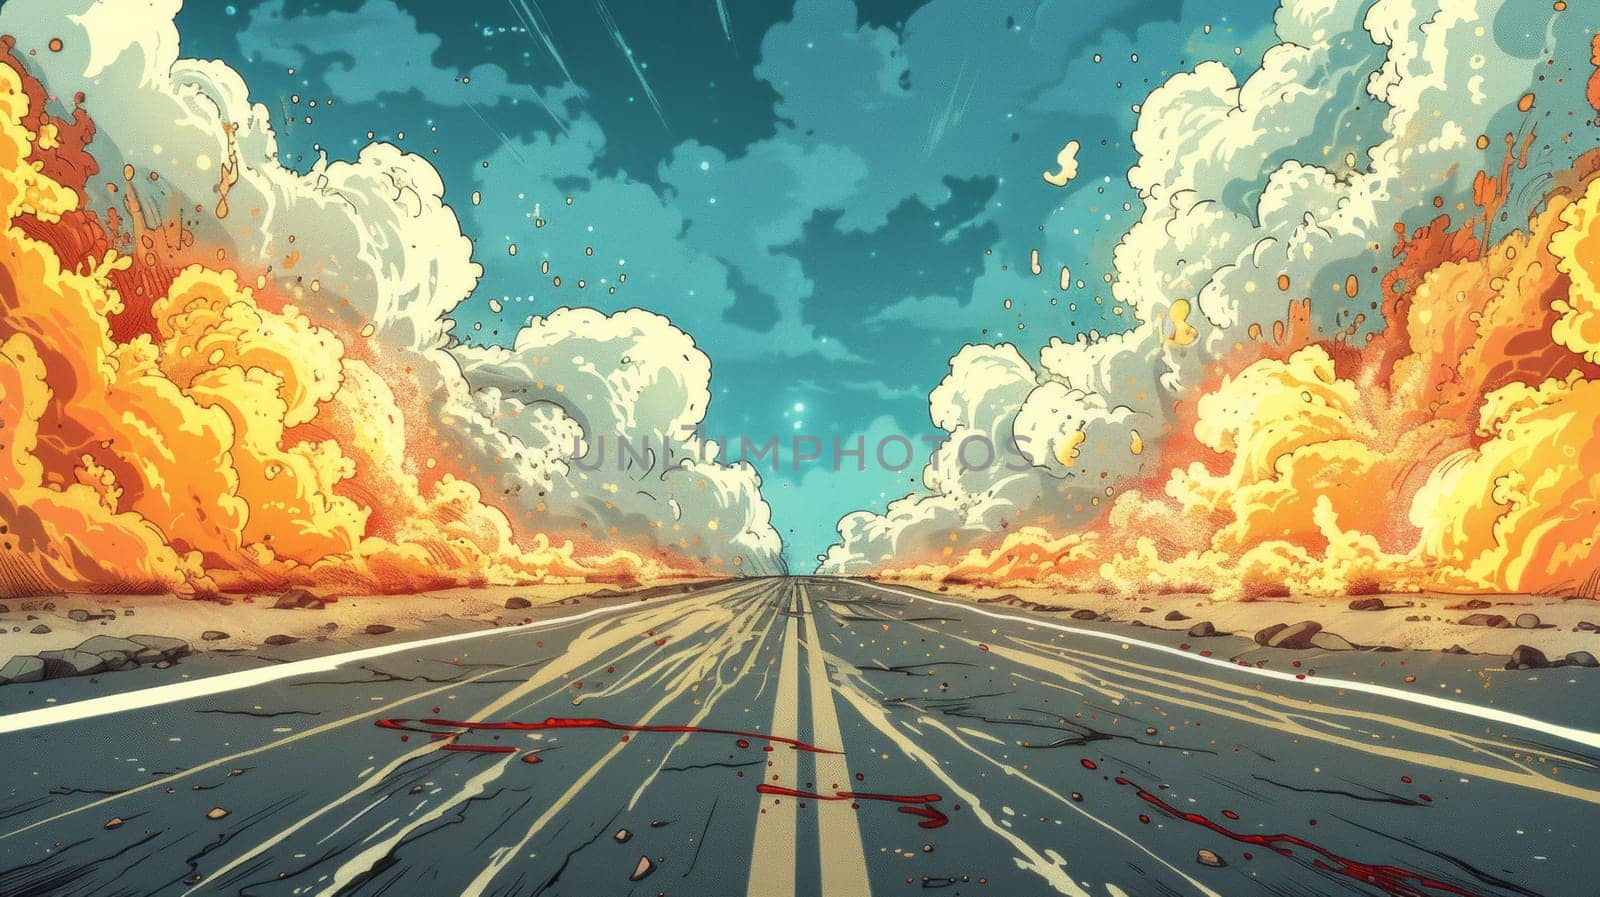 An illustration of a road with fire coming out from it